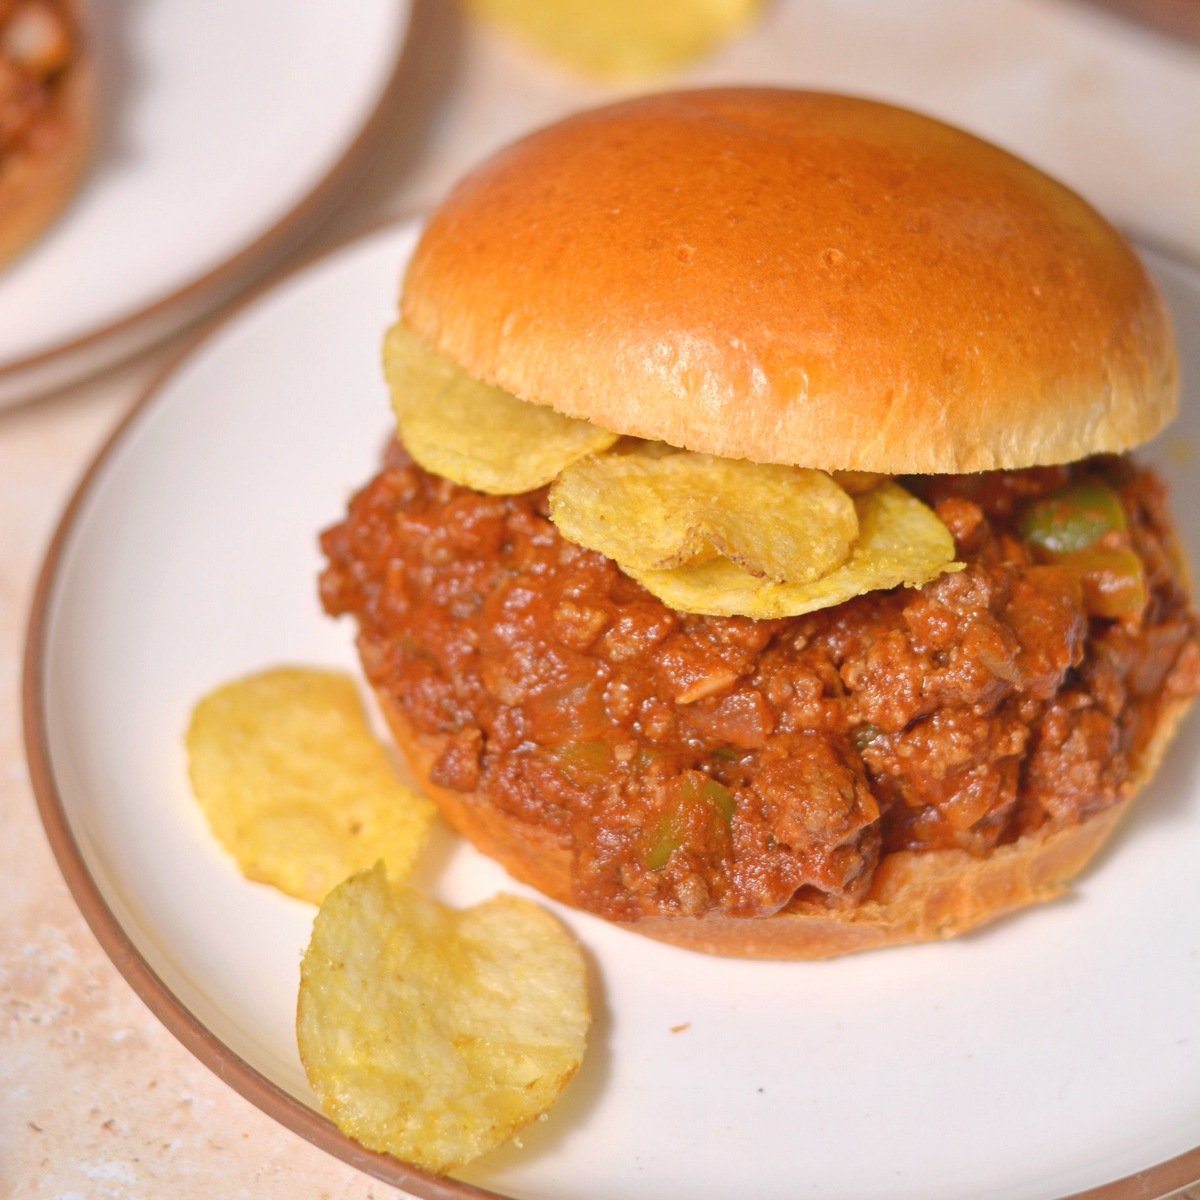 Sloppy joes with potato chips.